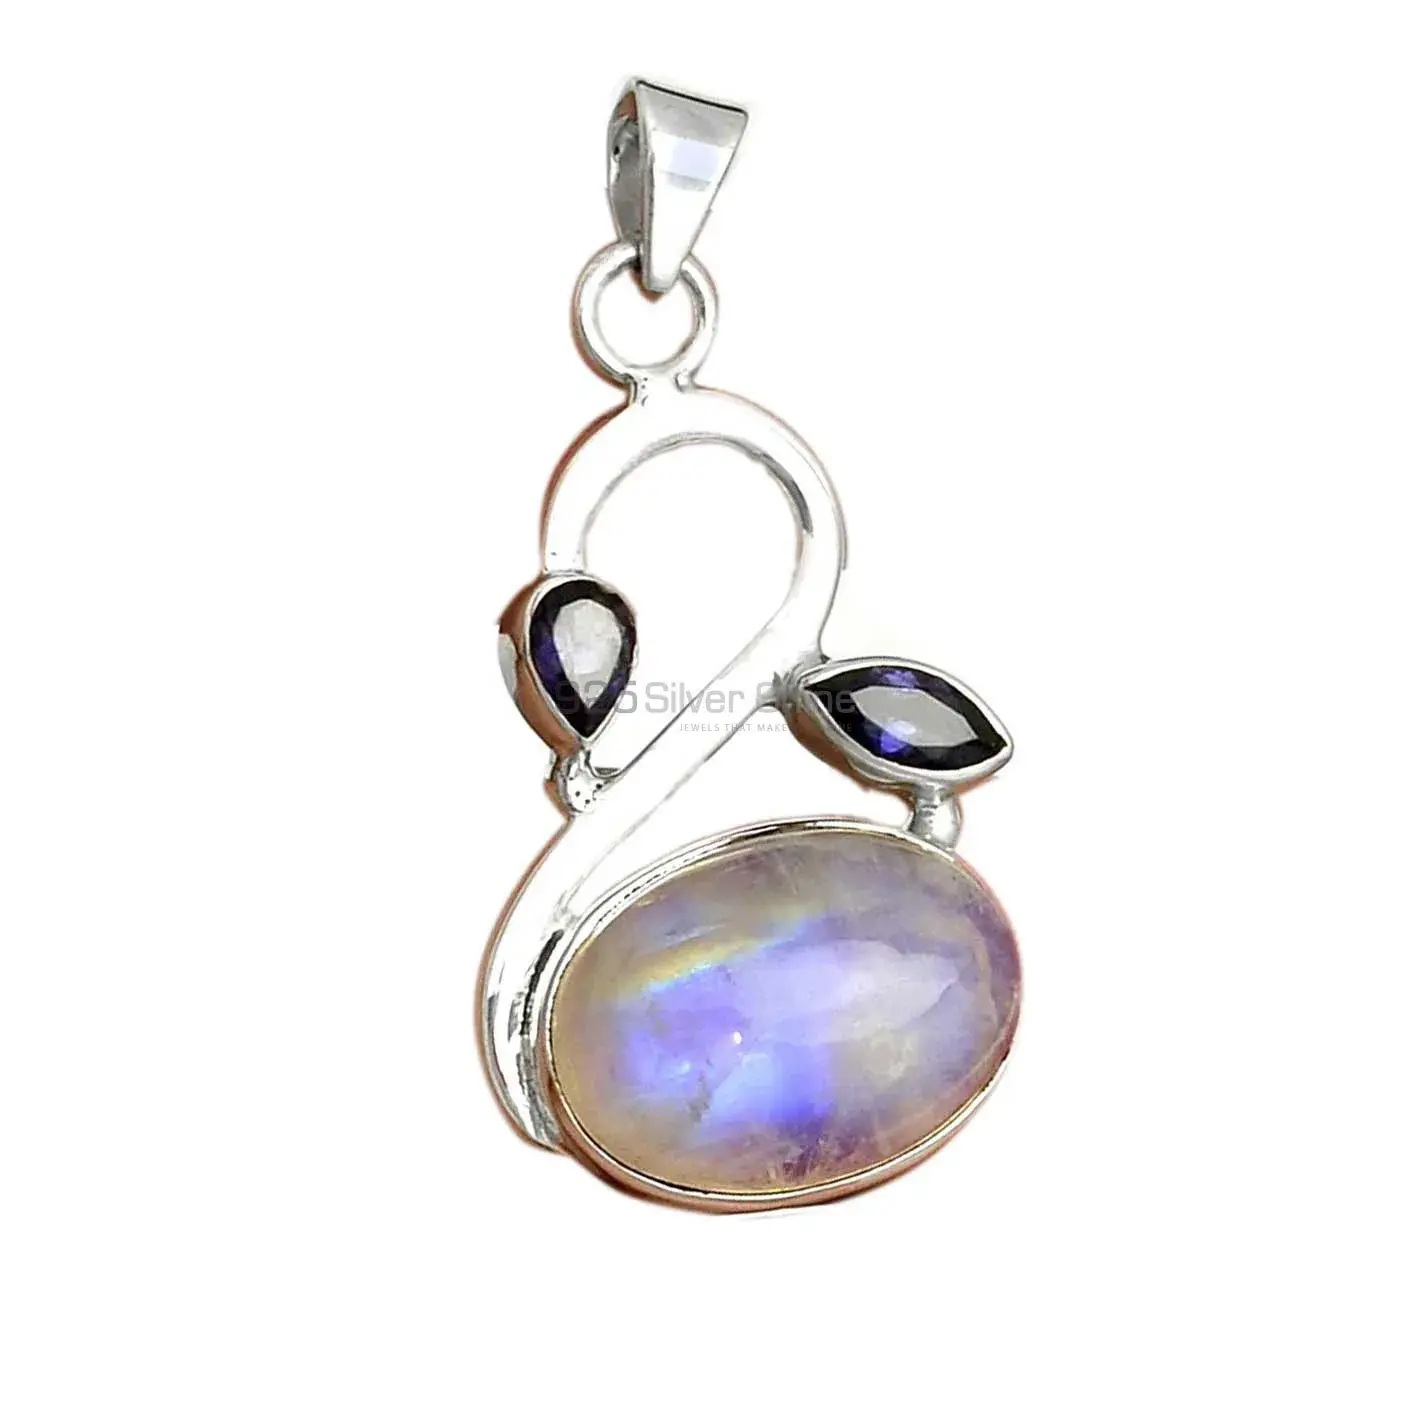 High Quality Solid Sterling Silver Handmade Pendants In Multi Gemstone Jewelry 925SP088-4_1